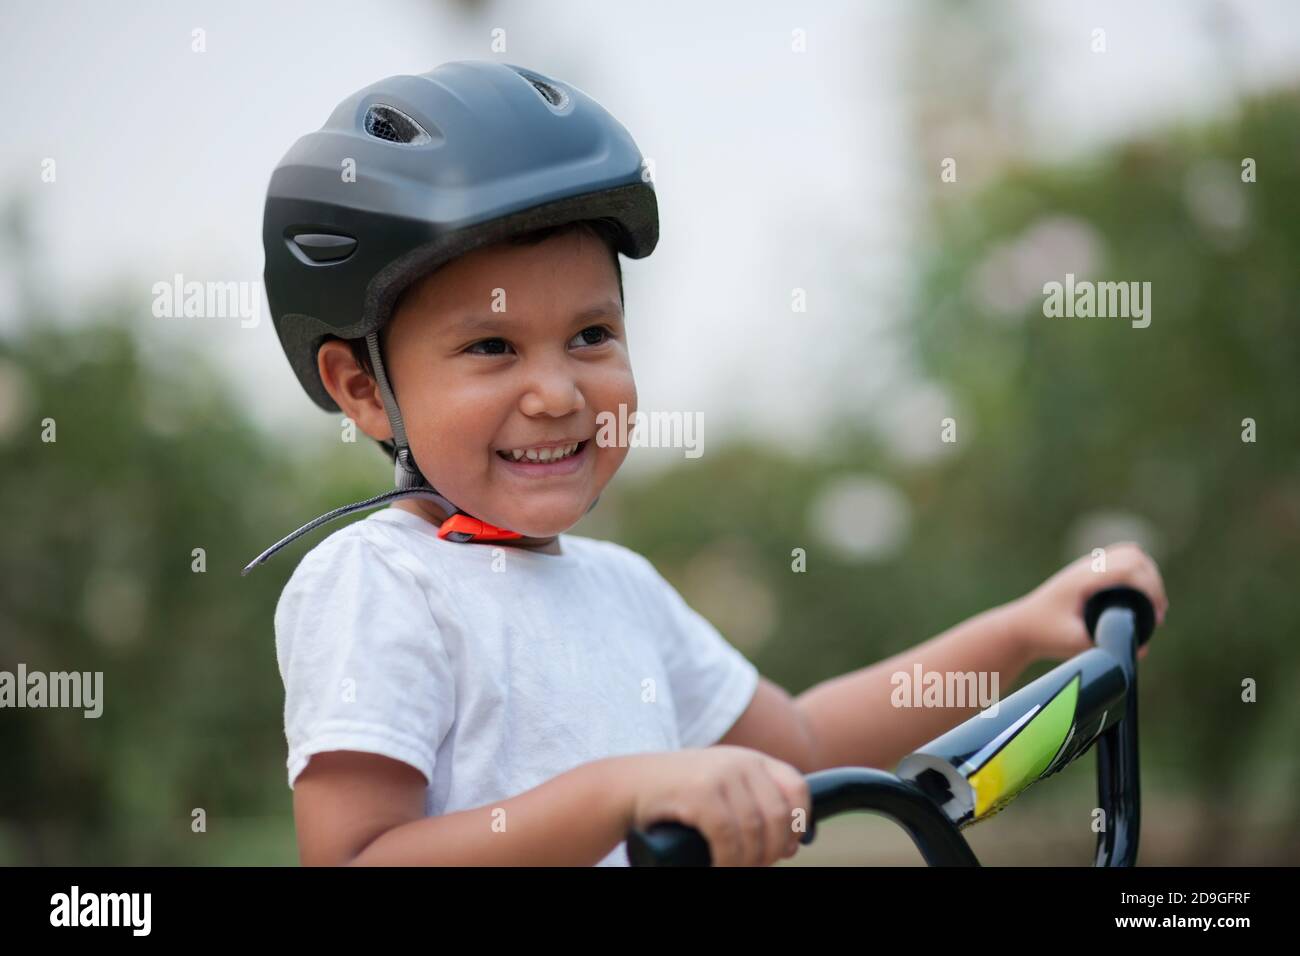 A four year old boy smiles, while wearing his bicycle helmet for safety and holding on to the bike's handle bars. Stock Photo